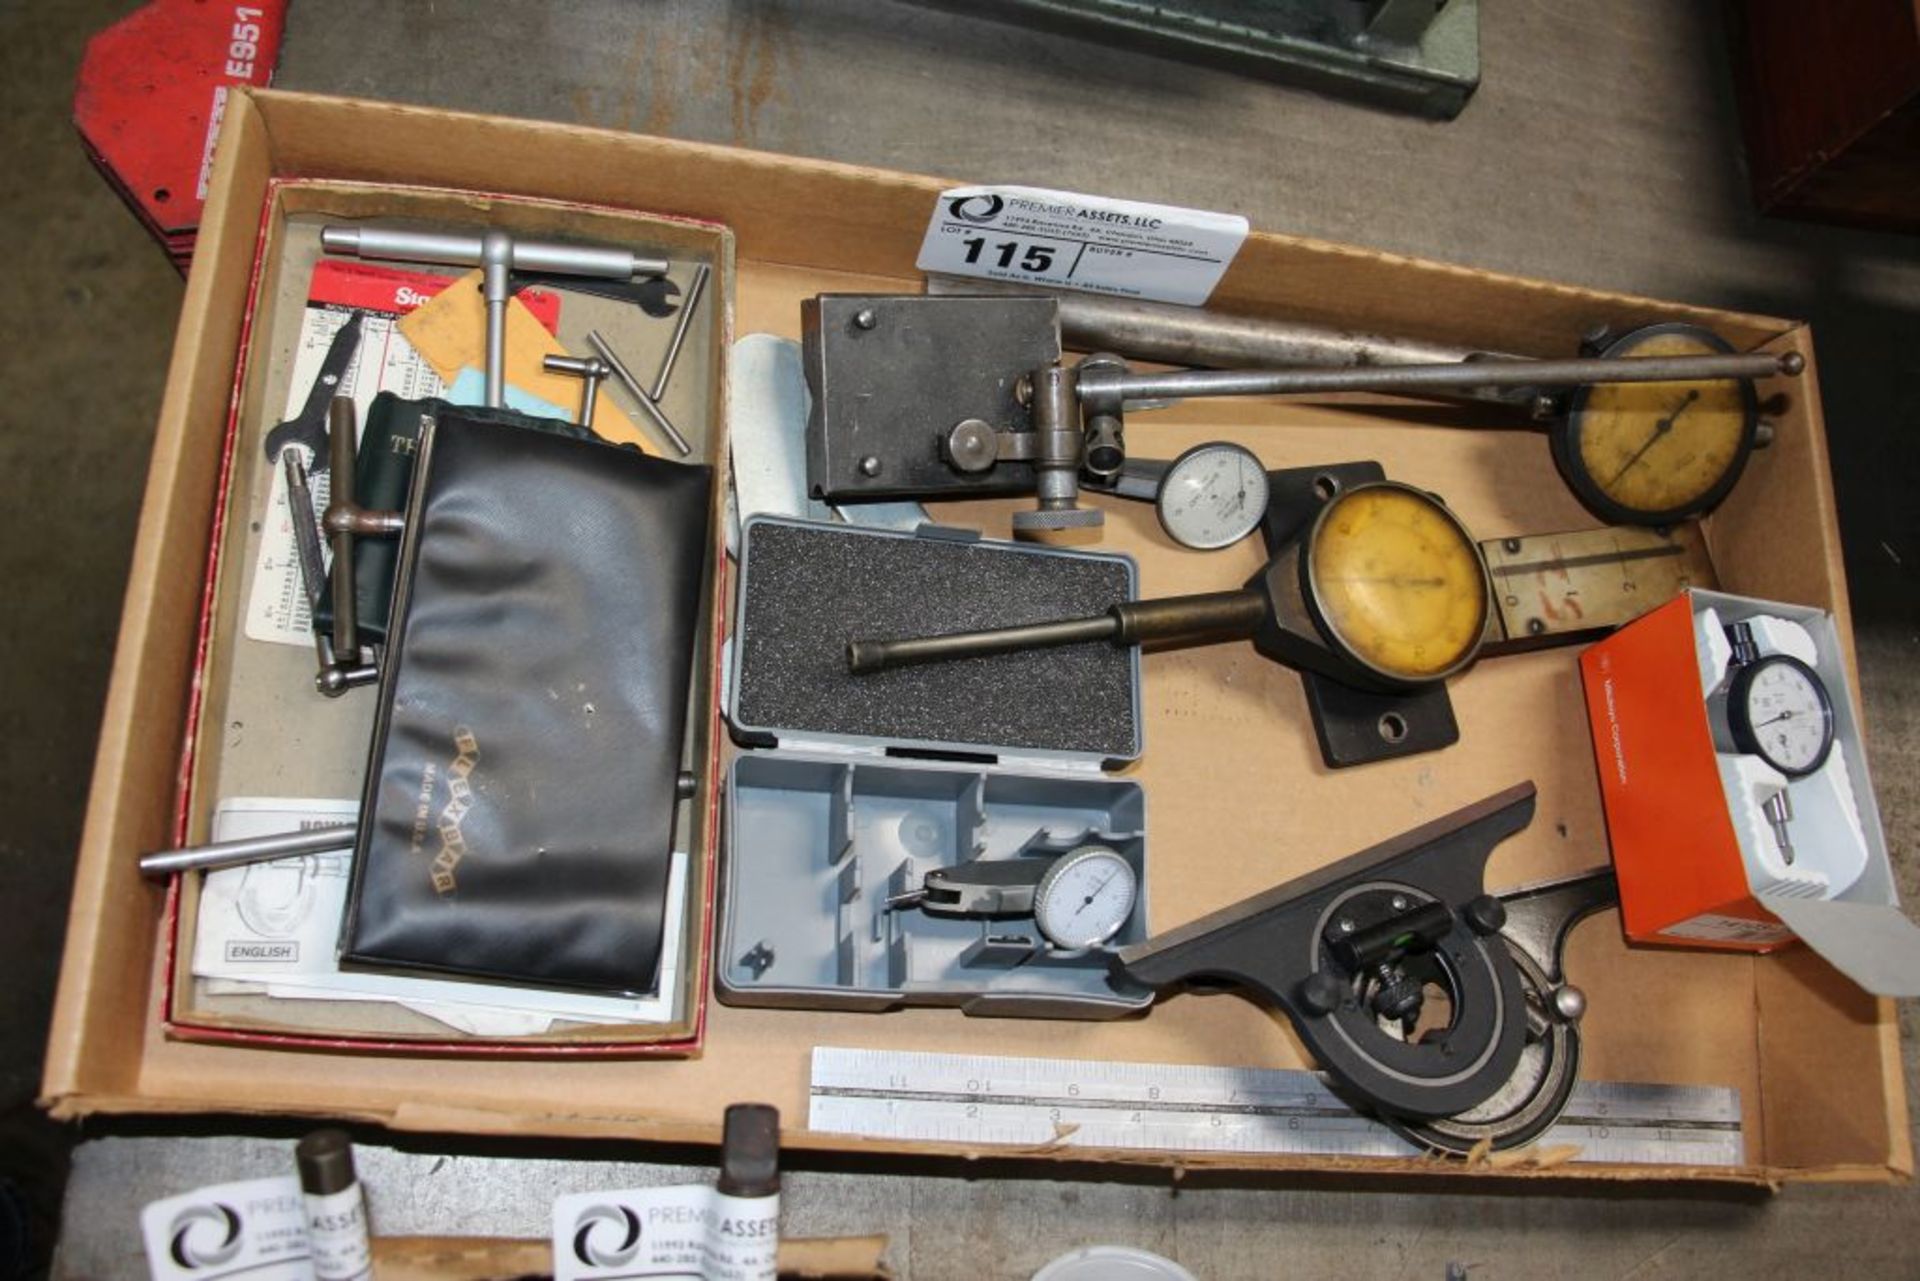 Assortment of precision tools: dial gauges, thread measuring wire set, telescoping gauge, surface